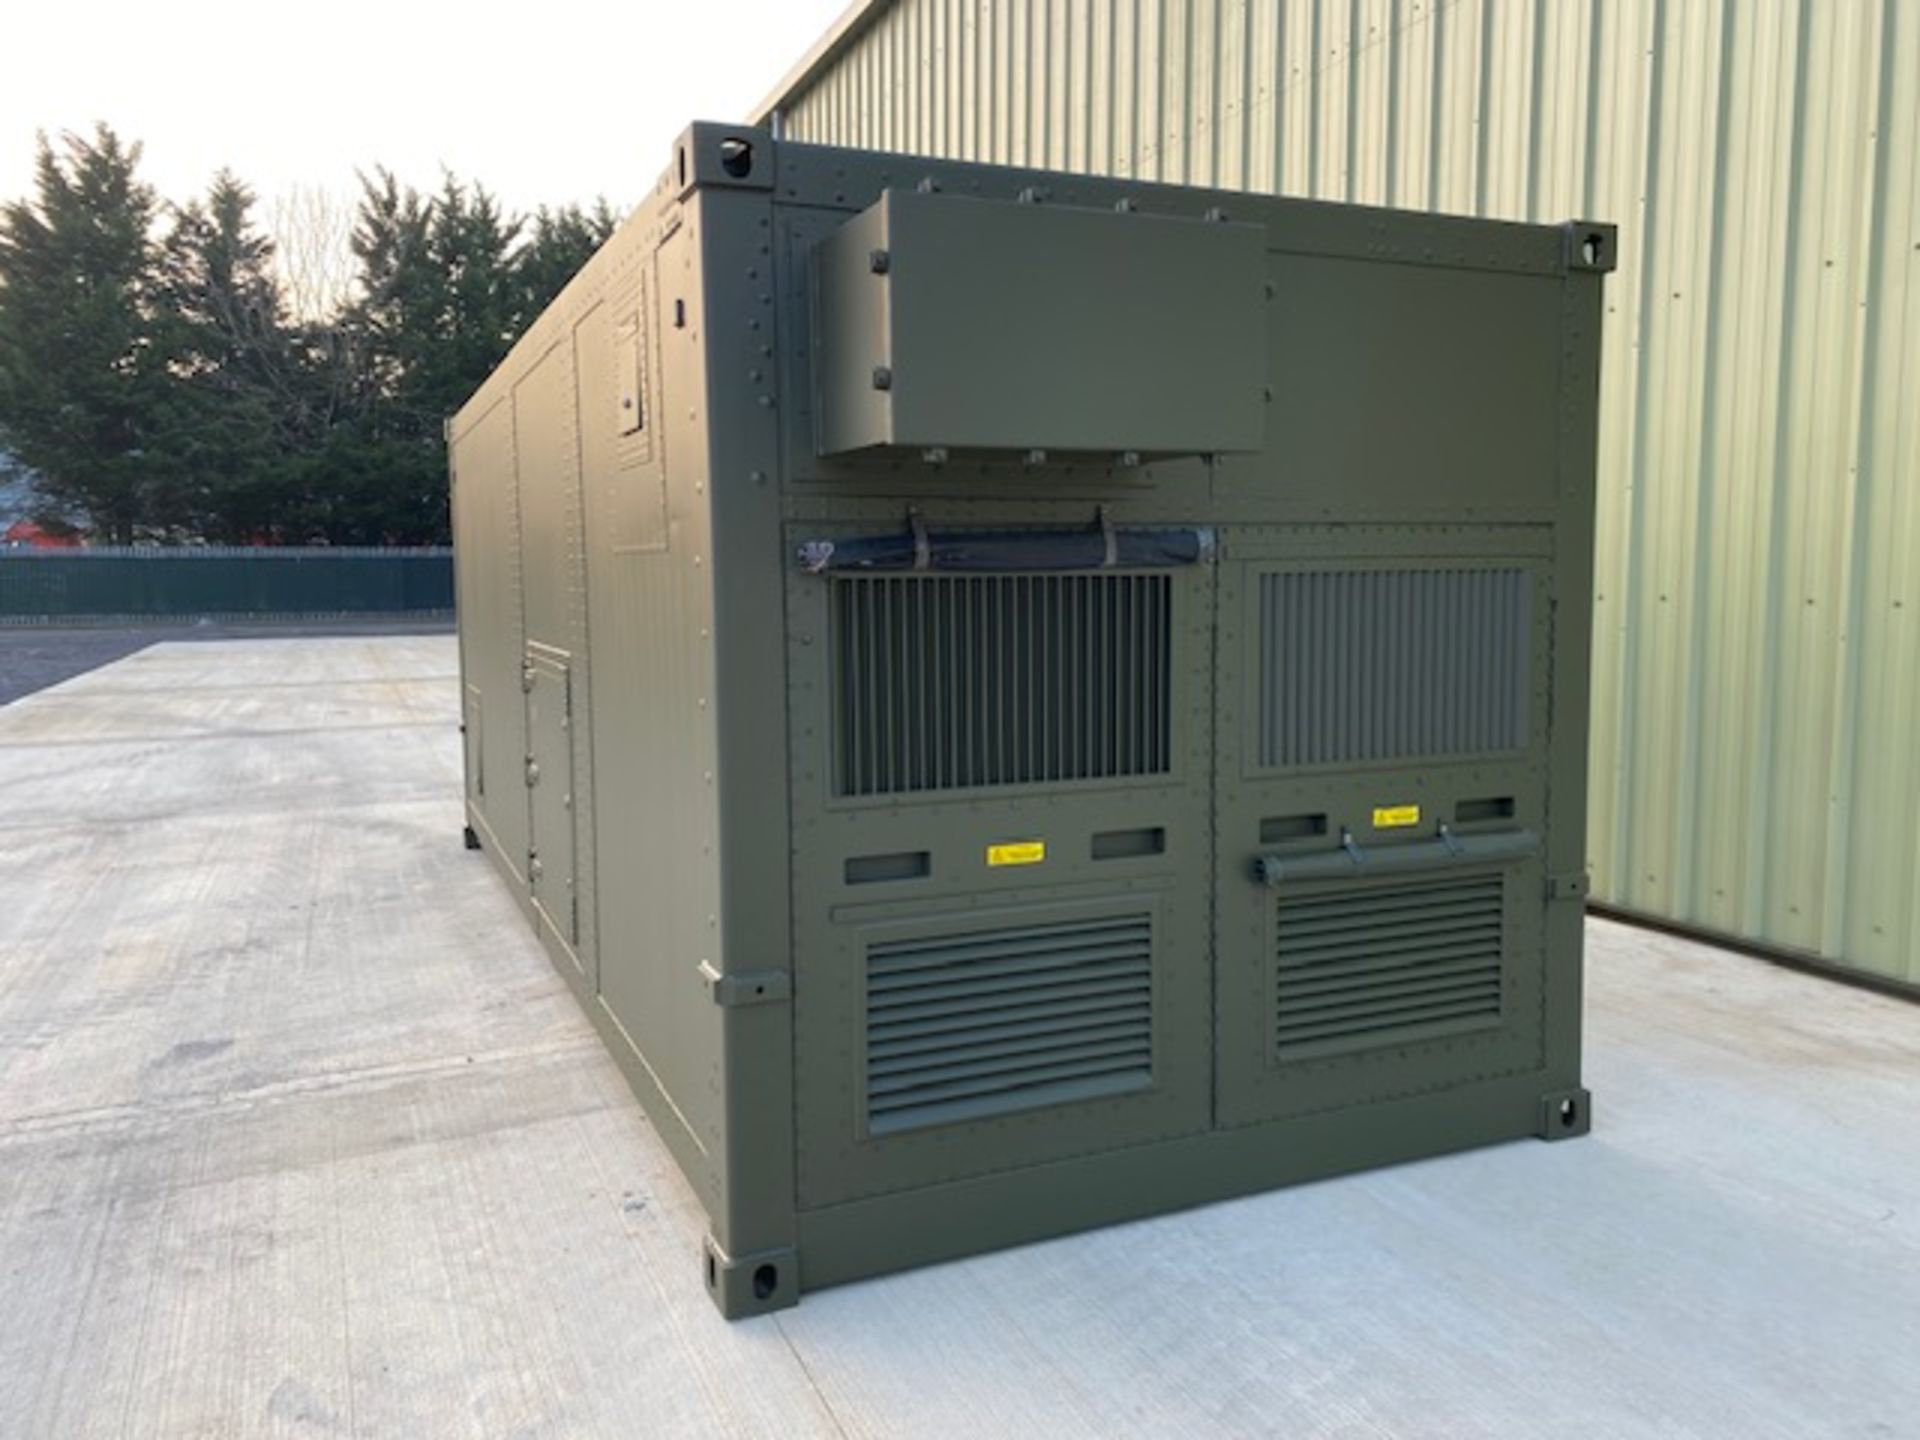 Transportable Lithium-ion Battery Storage & Charging Container From the UK Ministry of Defence - Image 12 of 65